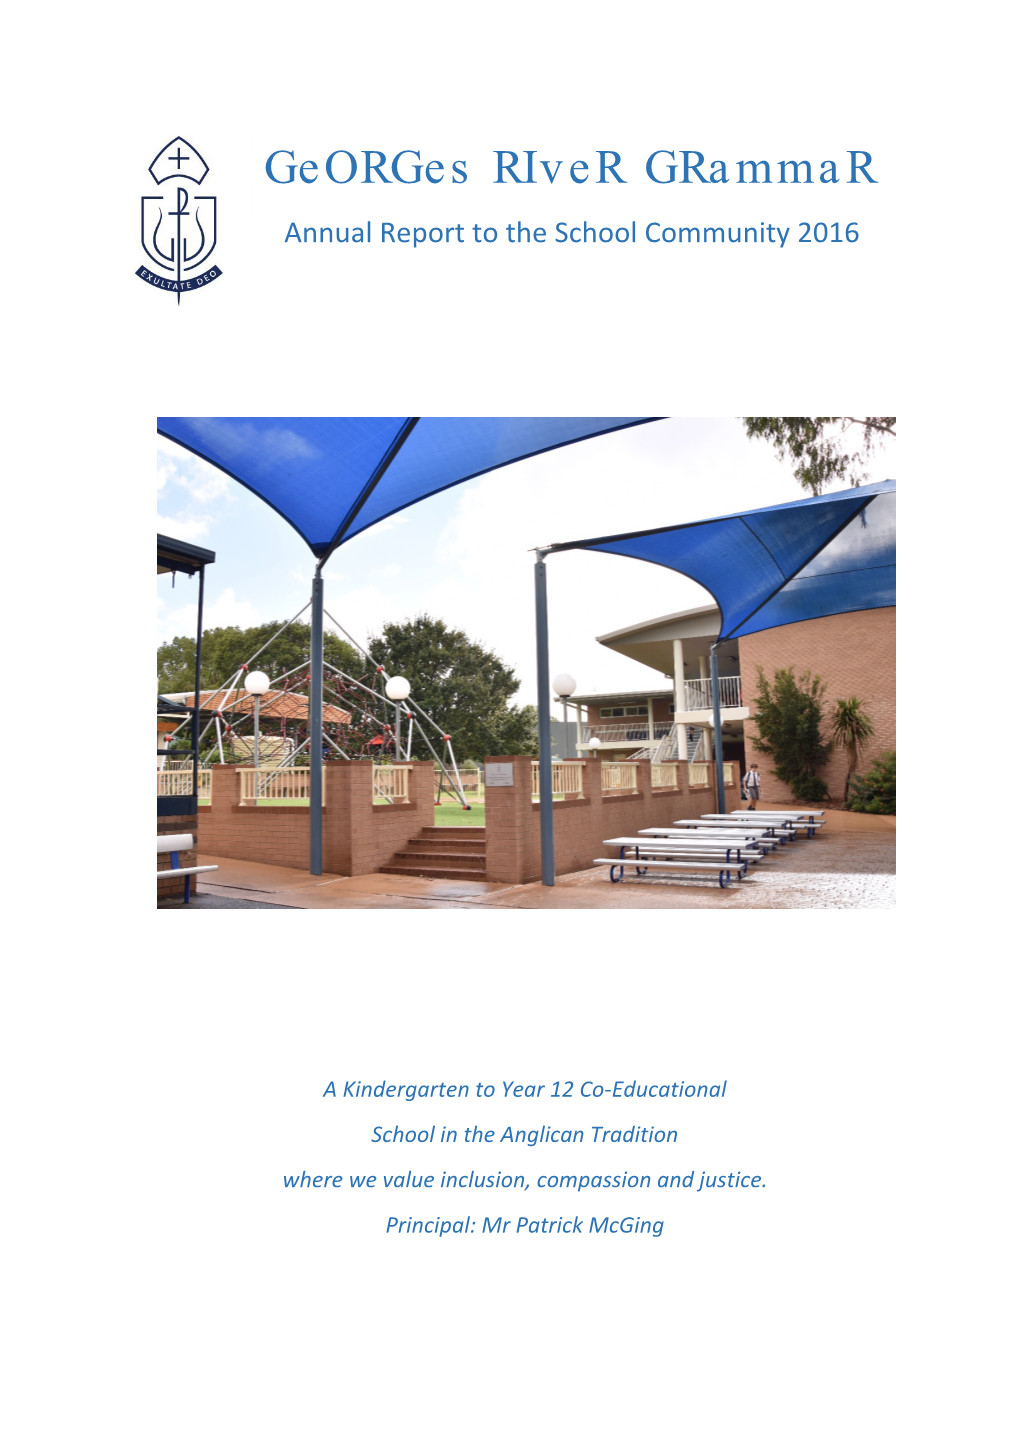 Annual Report to the School Community 2016